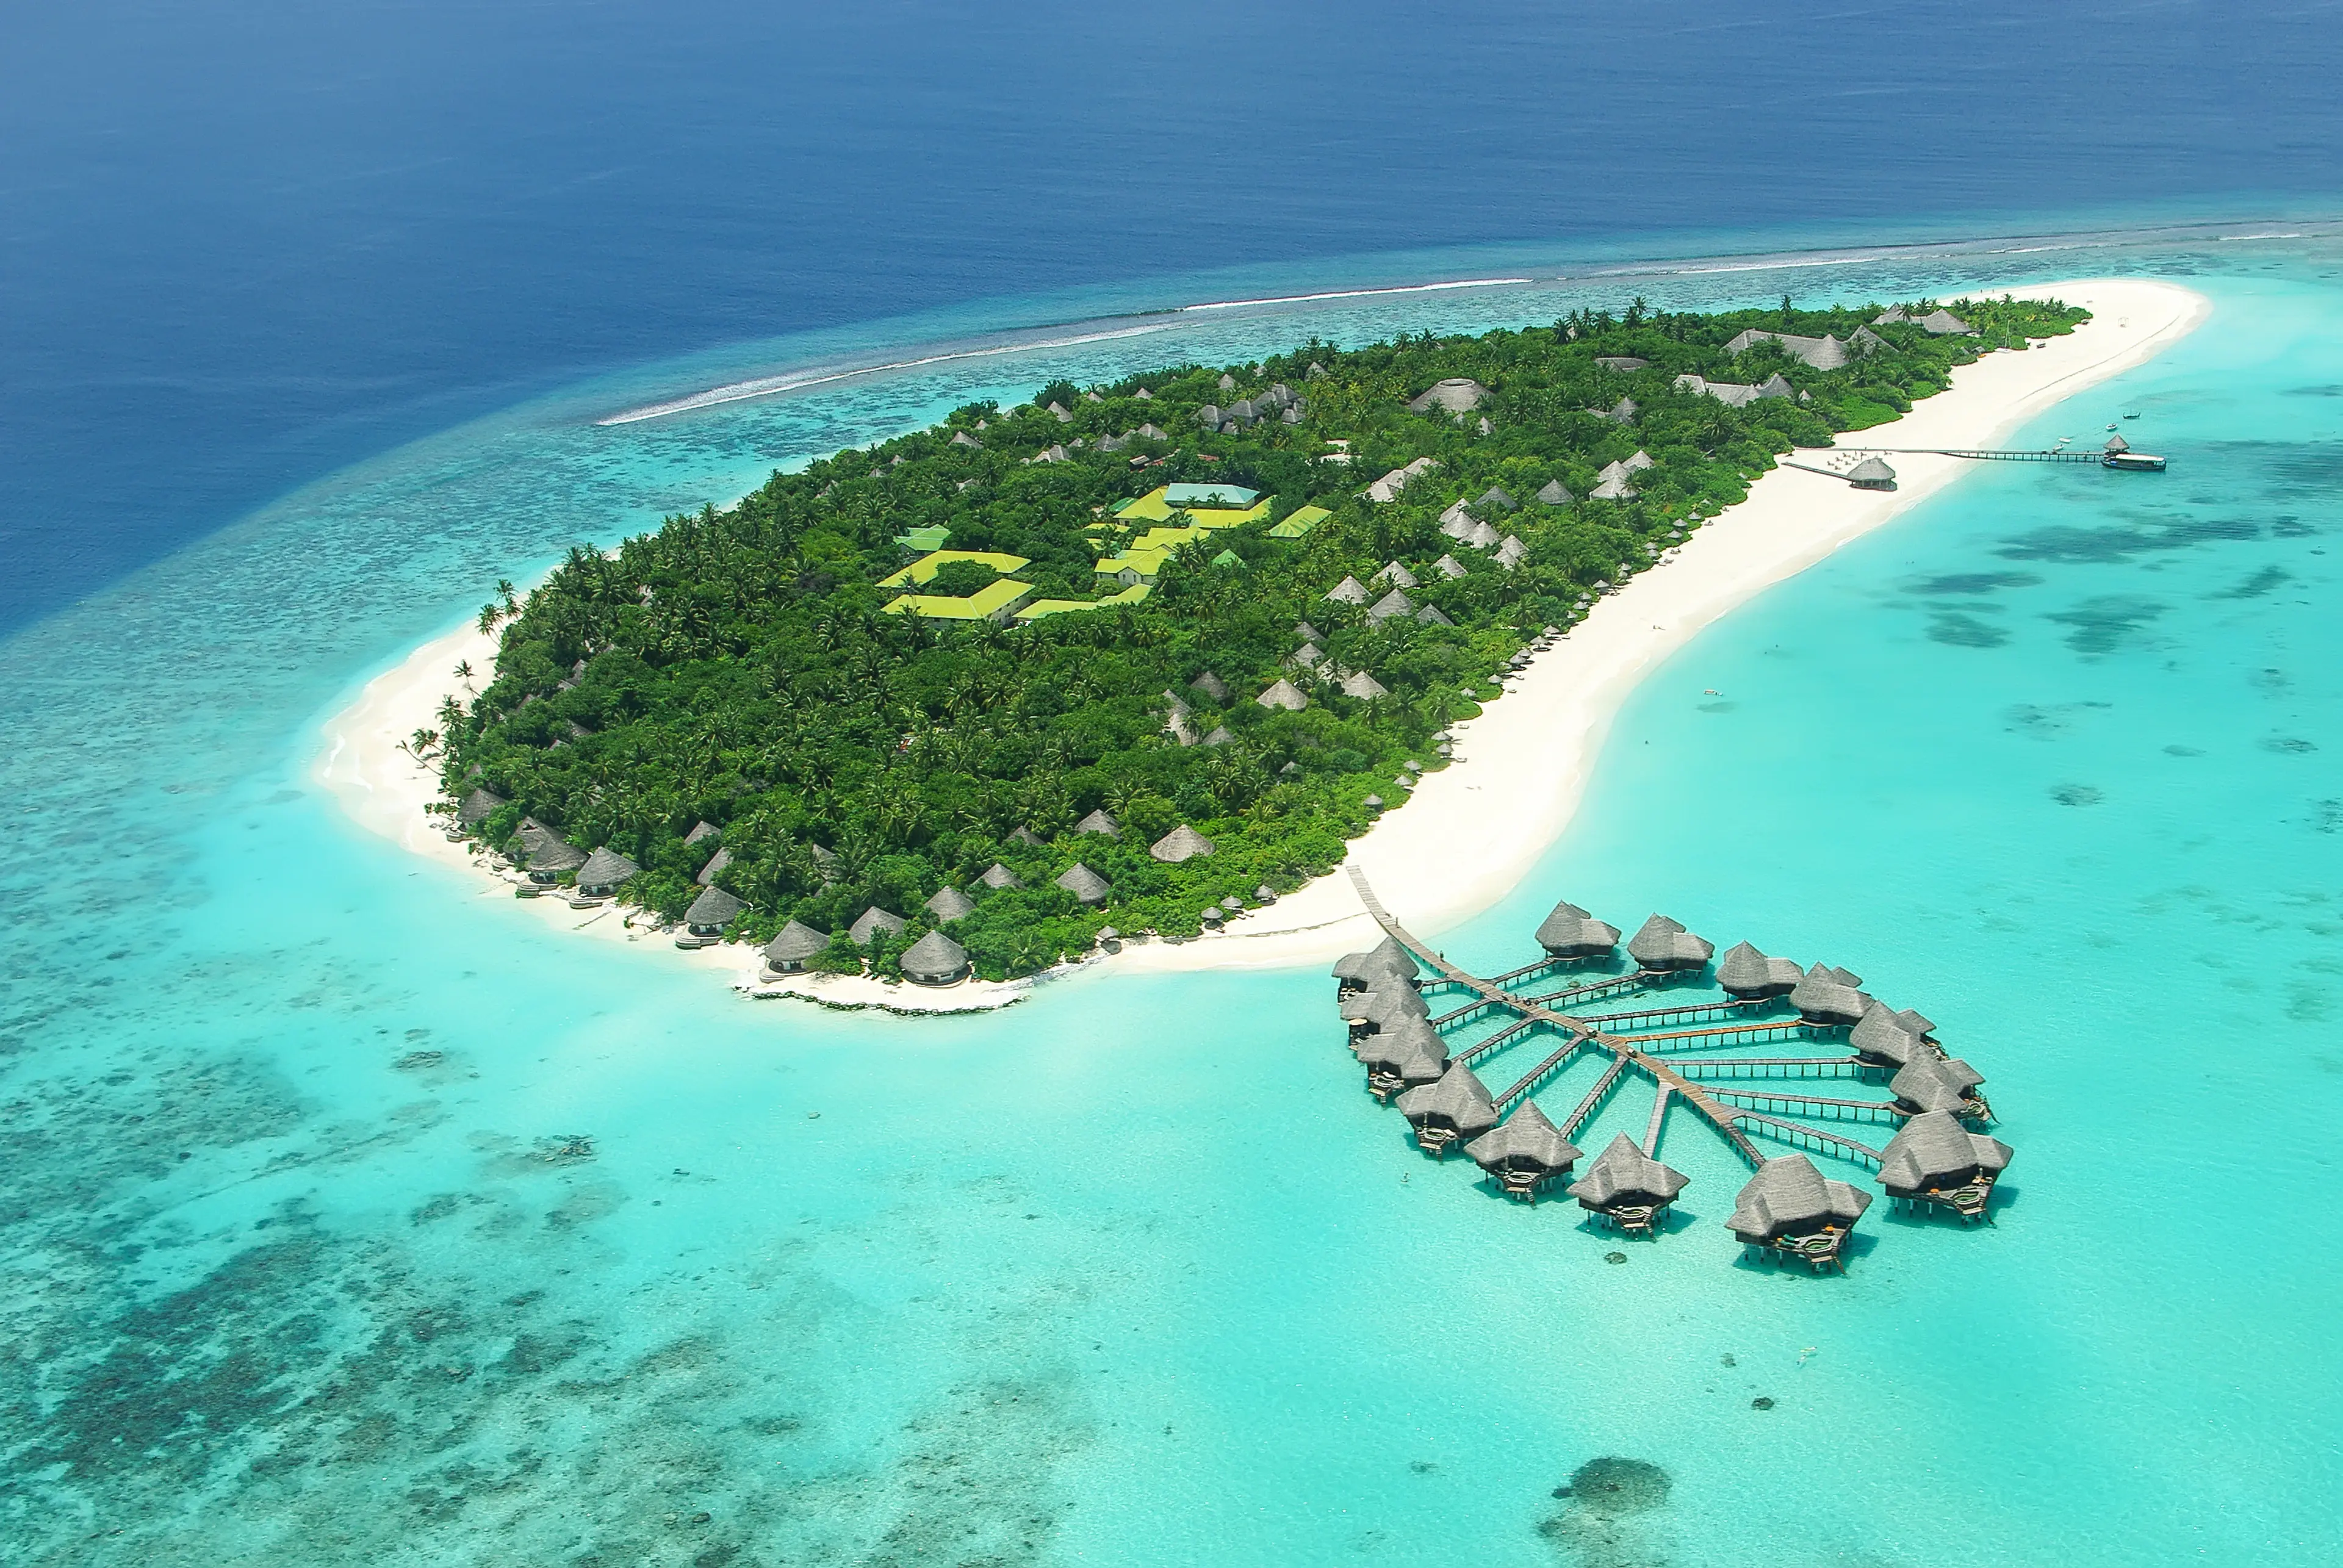 4-Day Maldives Getaway: Gourmet Cuisine and Relaxation with Friends